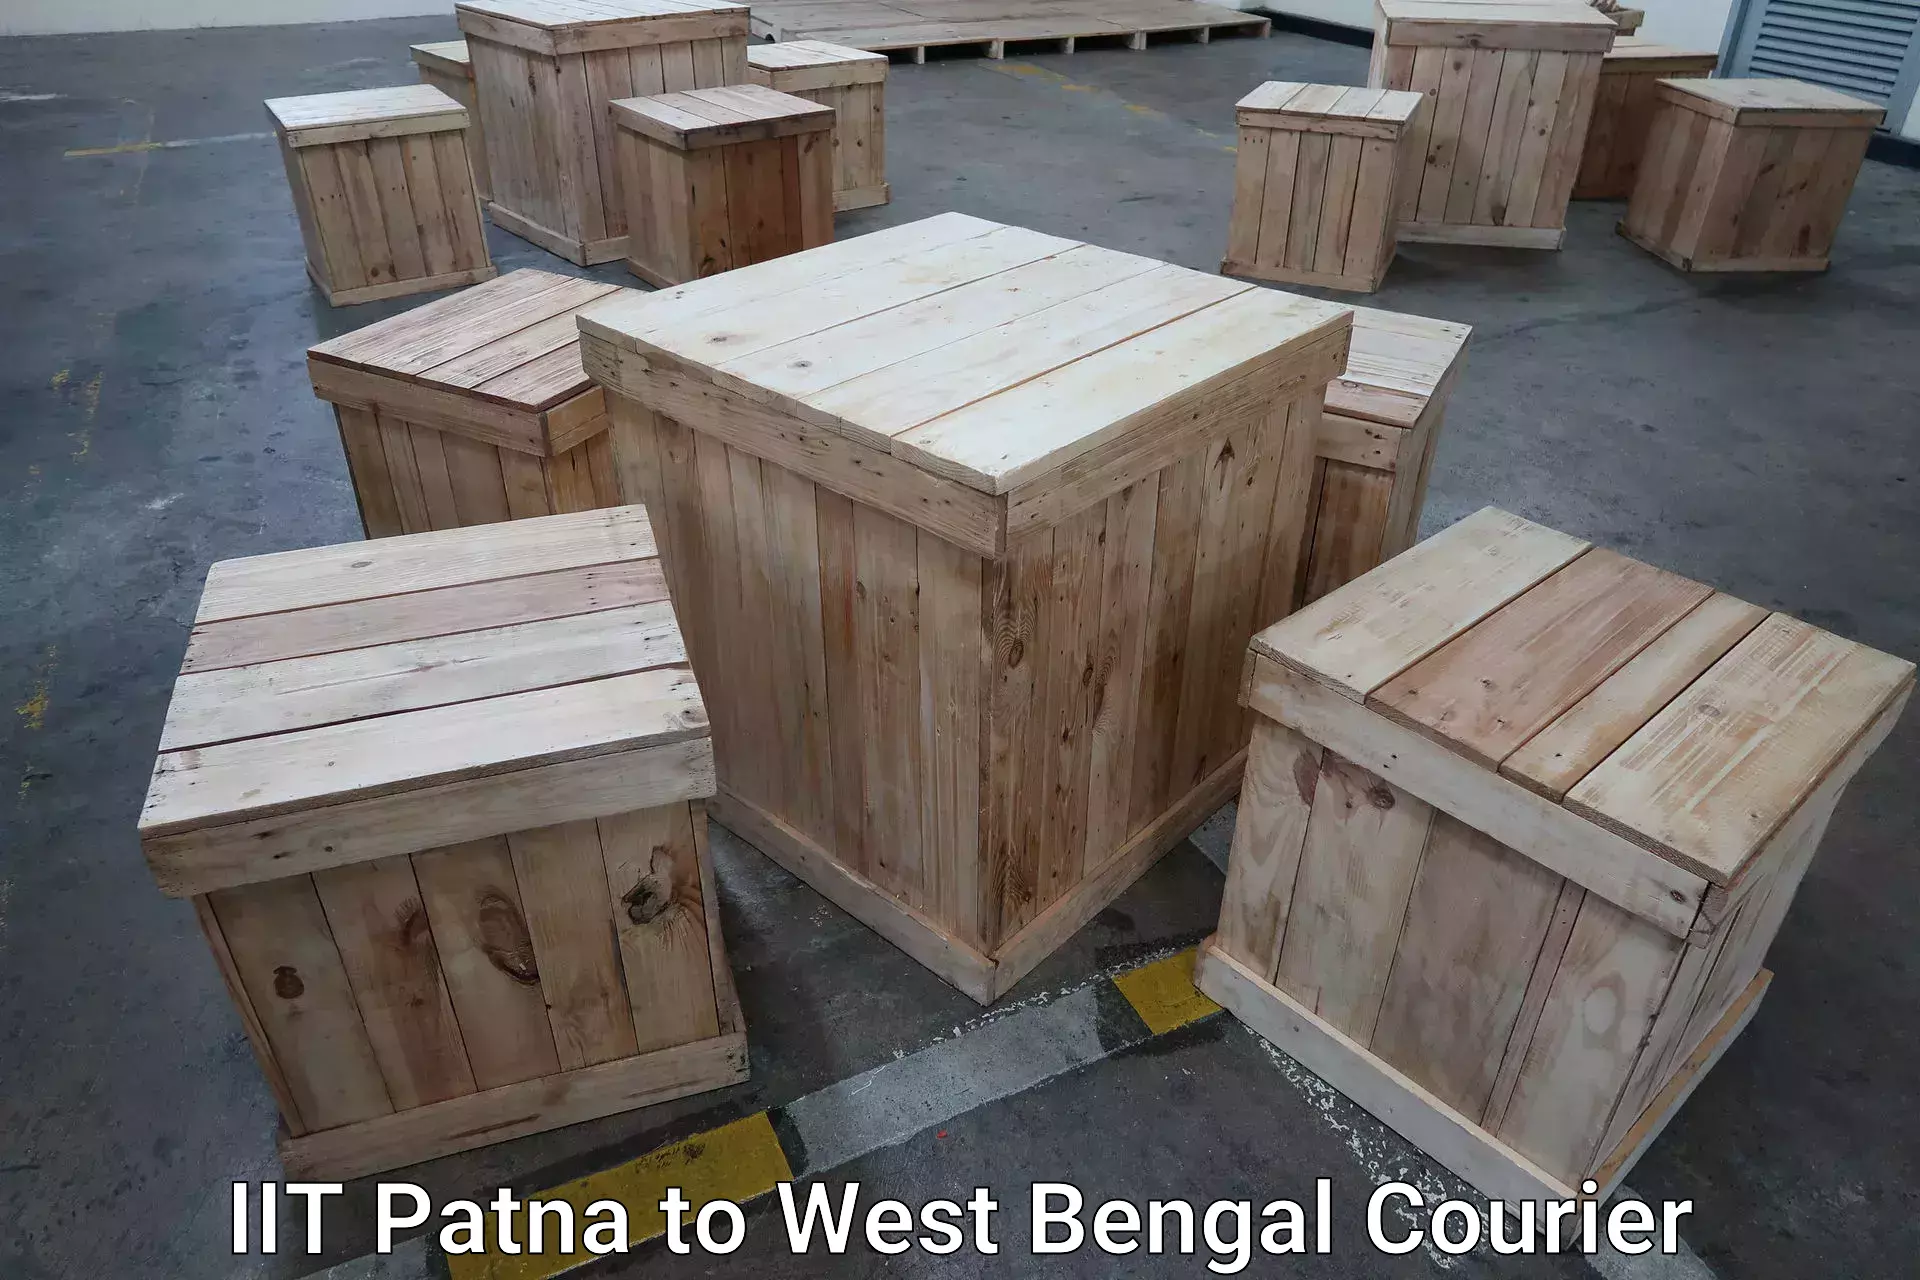 Baggage transport network IIT Patna to West Bengal